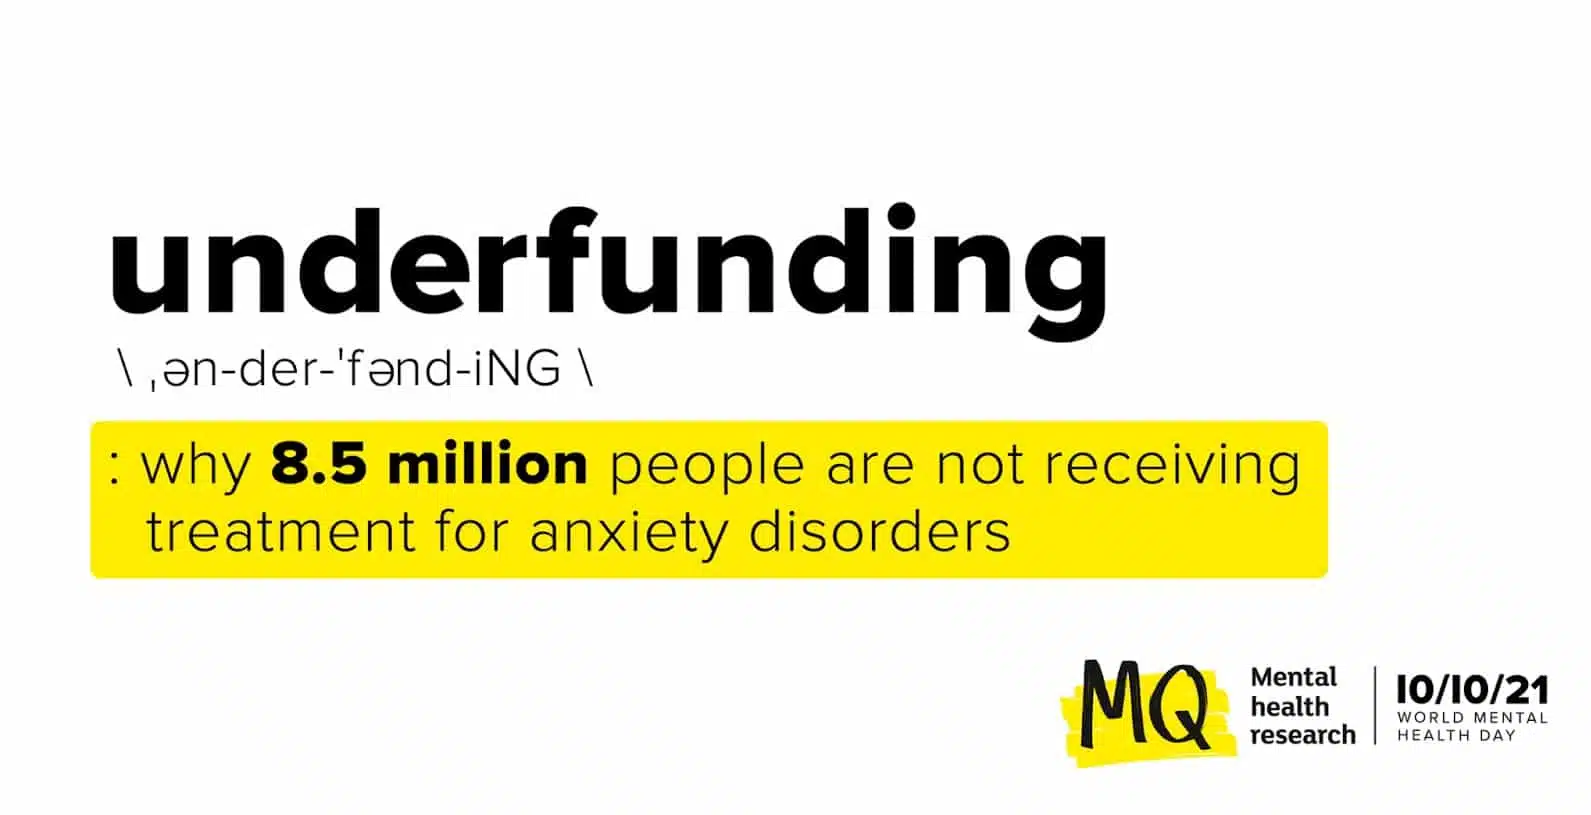 Underfunding: why 8.5 million people are not receiving treatment for anxiety disorders